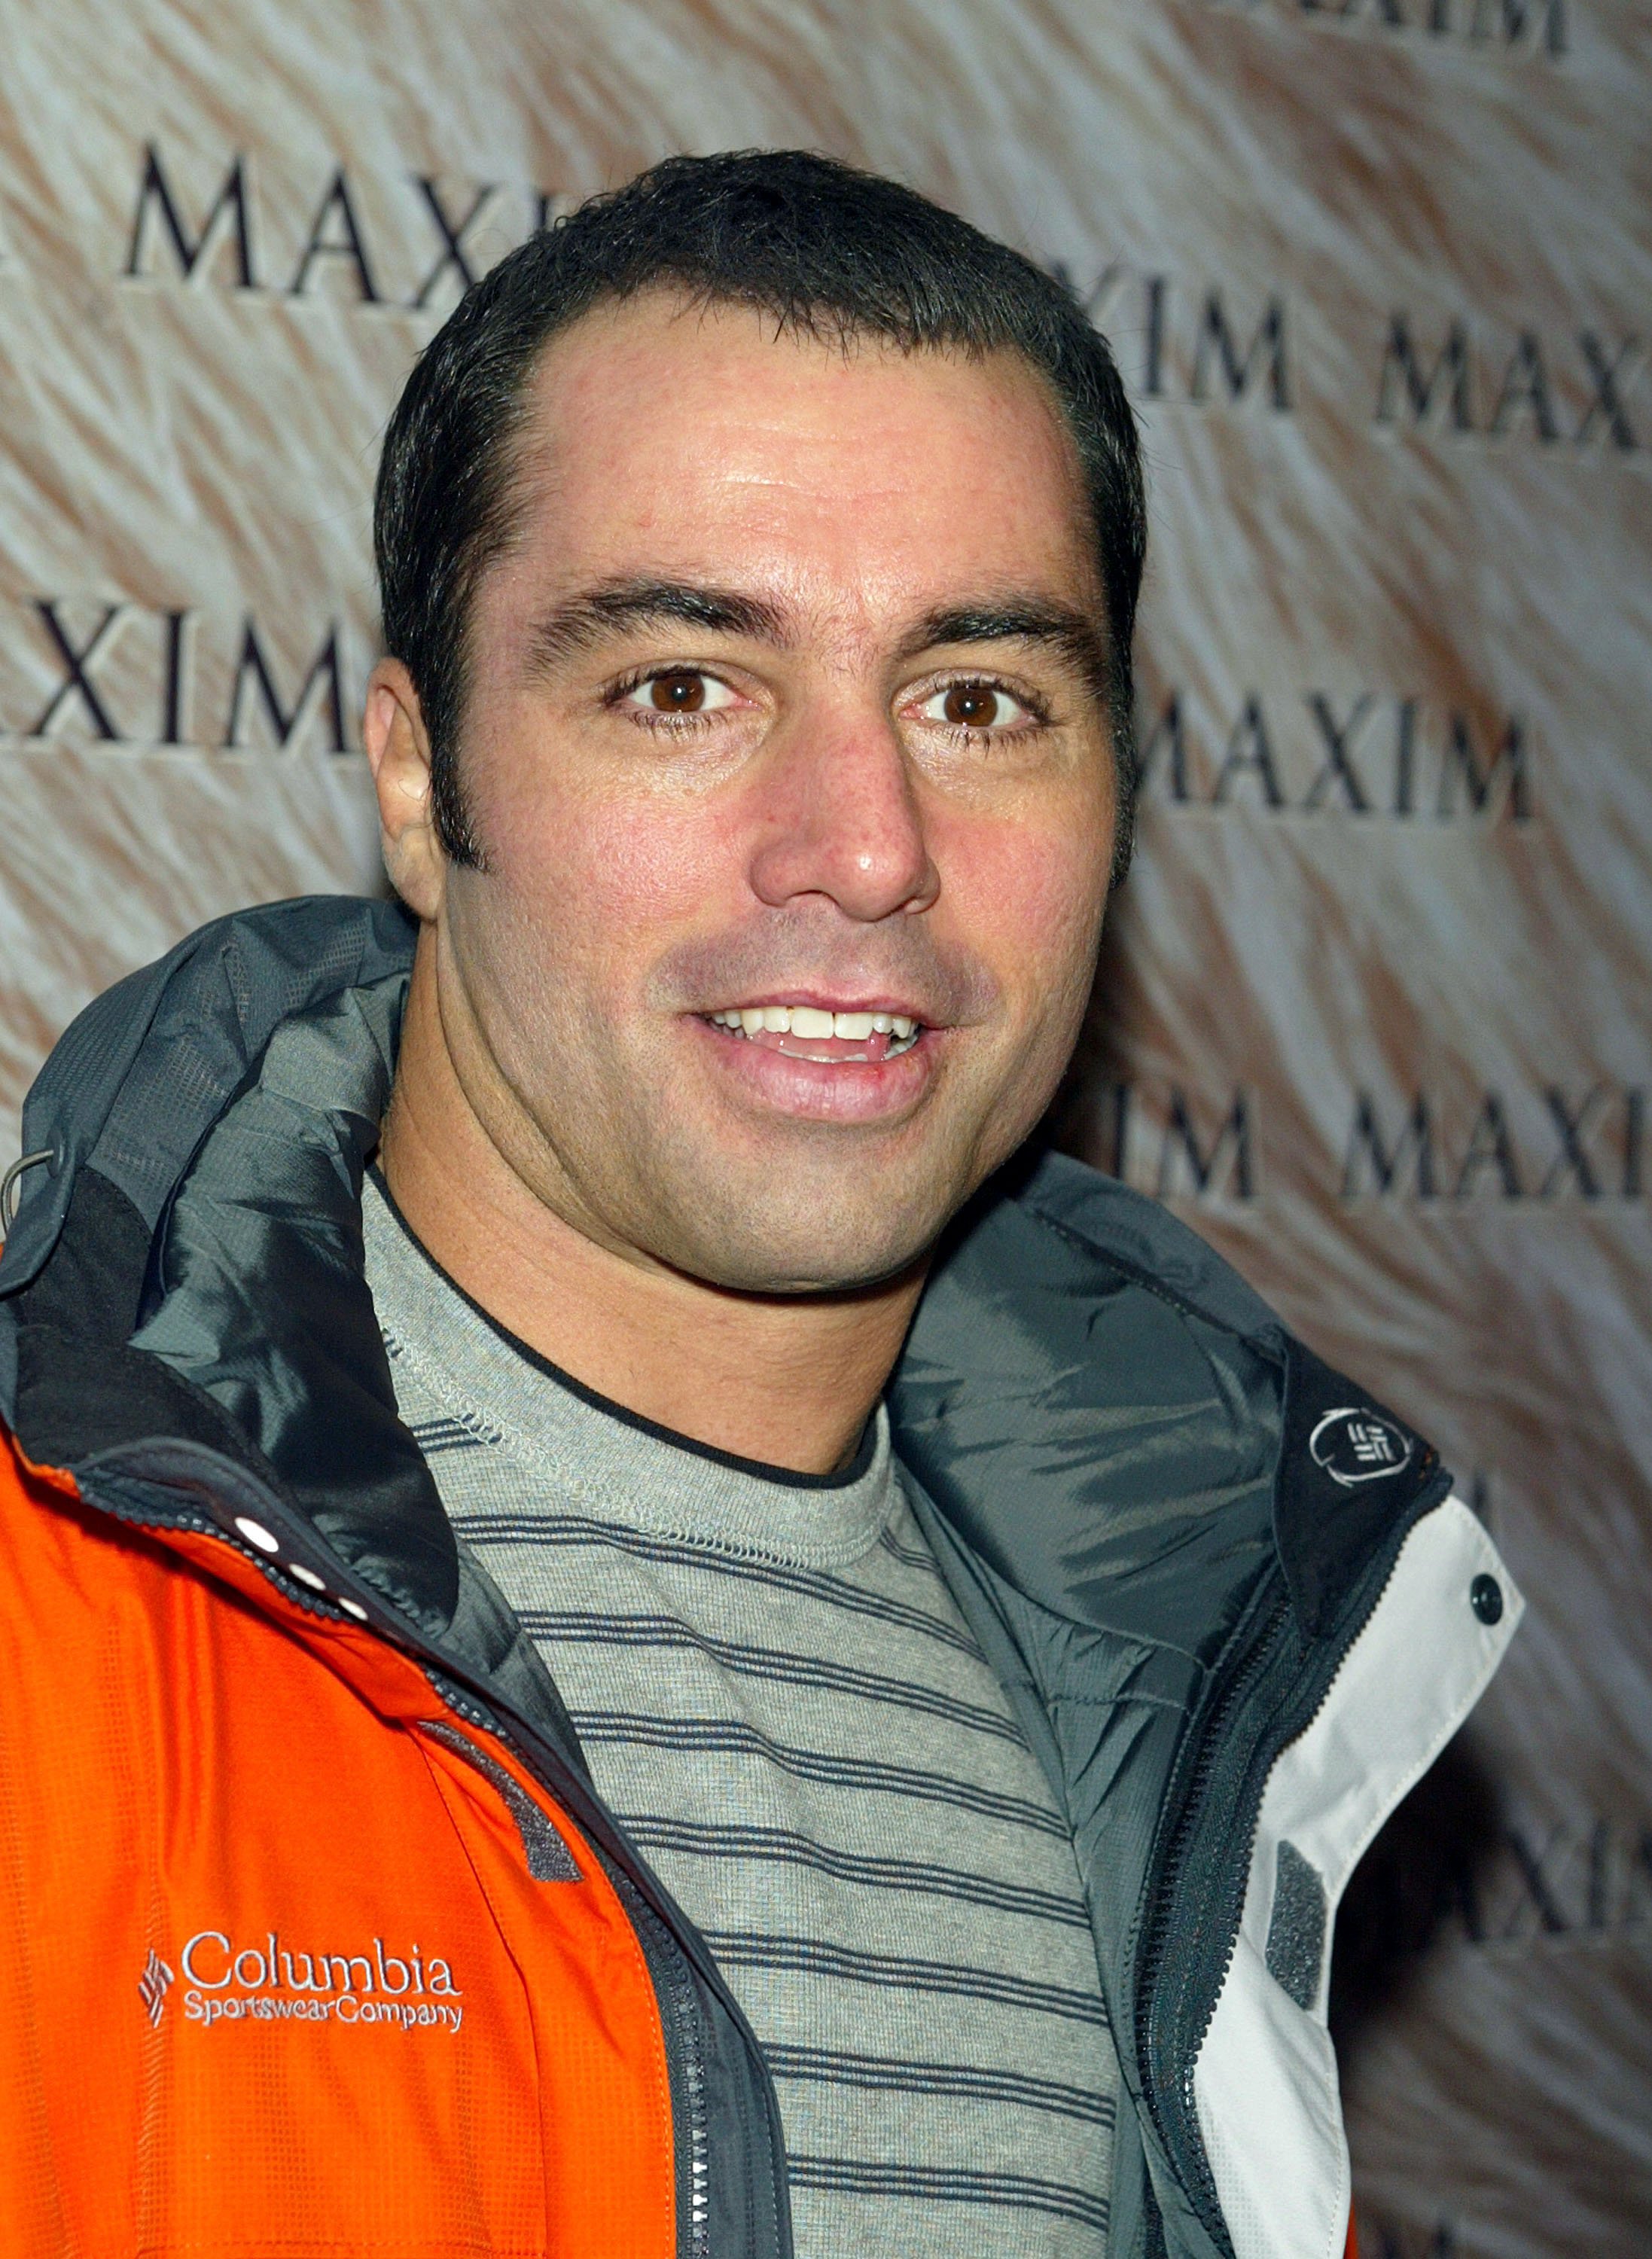 Joe Rogan arrives at Maxim Magazine's "Warm and Fuzzy" party for the US Comedy Arts Festival at Whiskey Rocks on February 28, 2003, in Aspen, Colorado. | Source: Getty Images